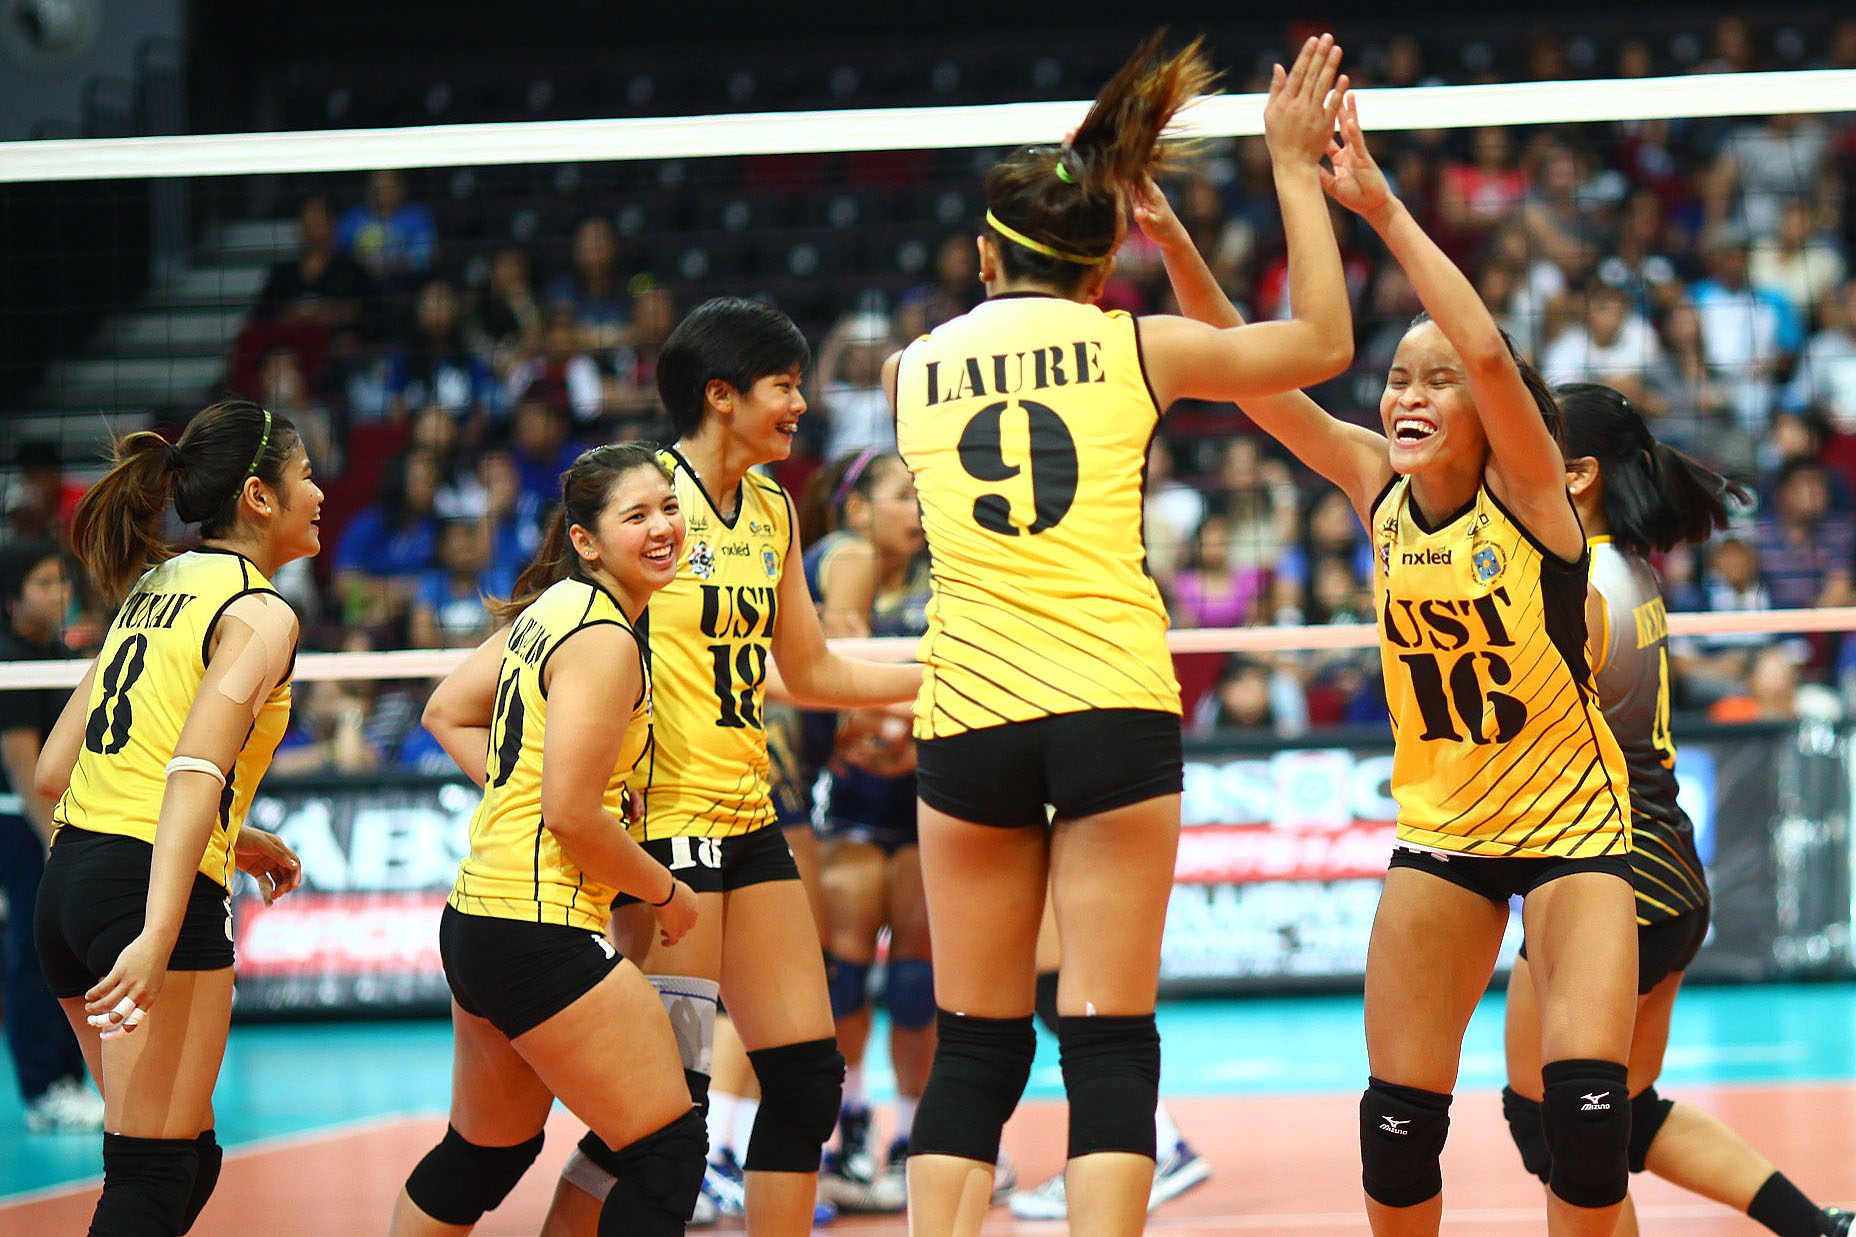 UST sweeps UE to open second round